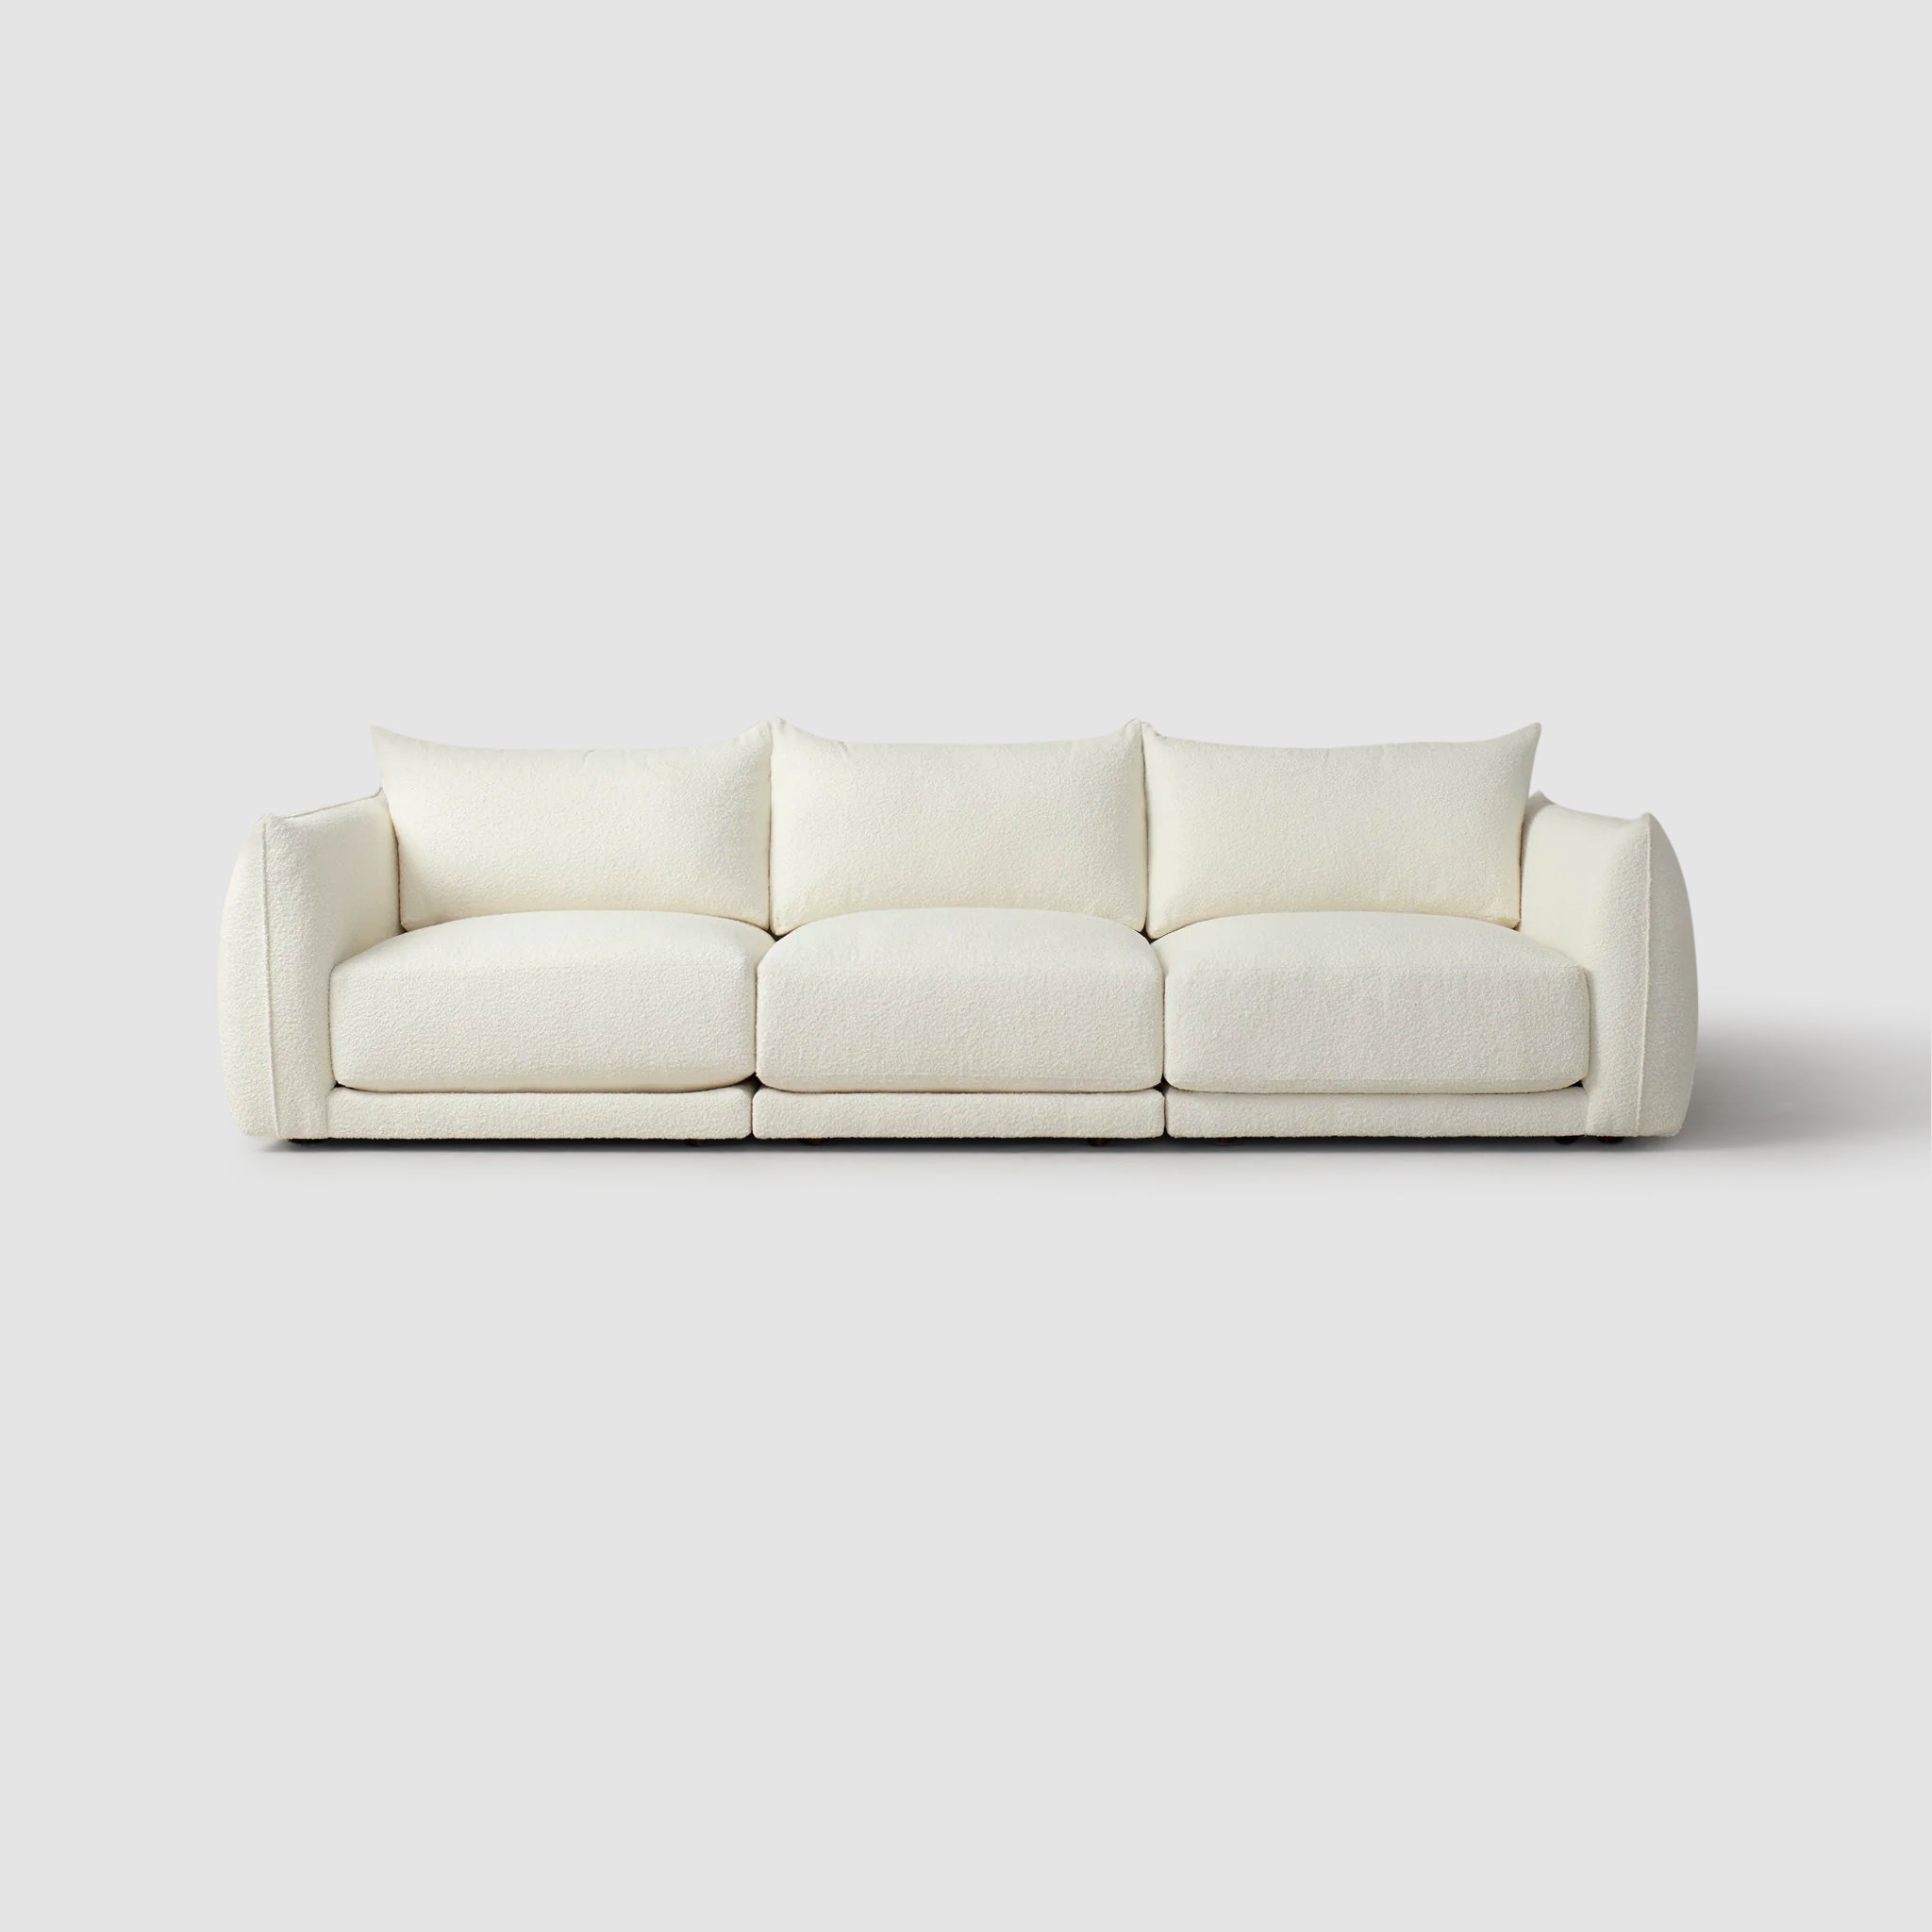 Front view of The Jules Sofa in white fabric